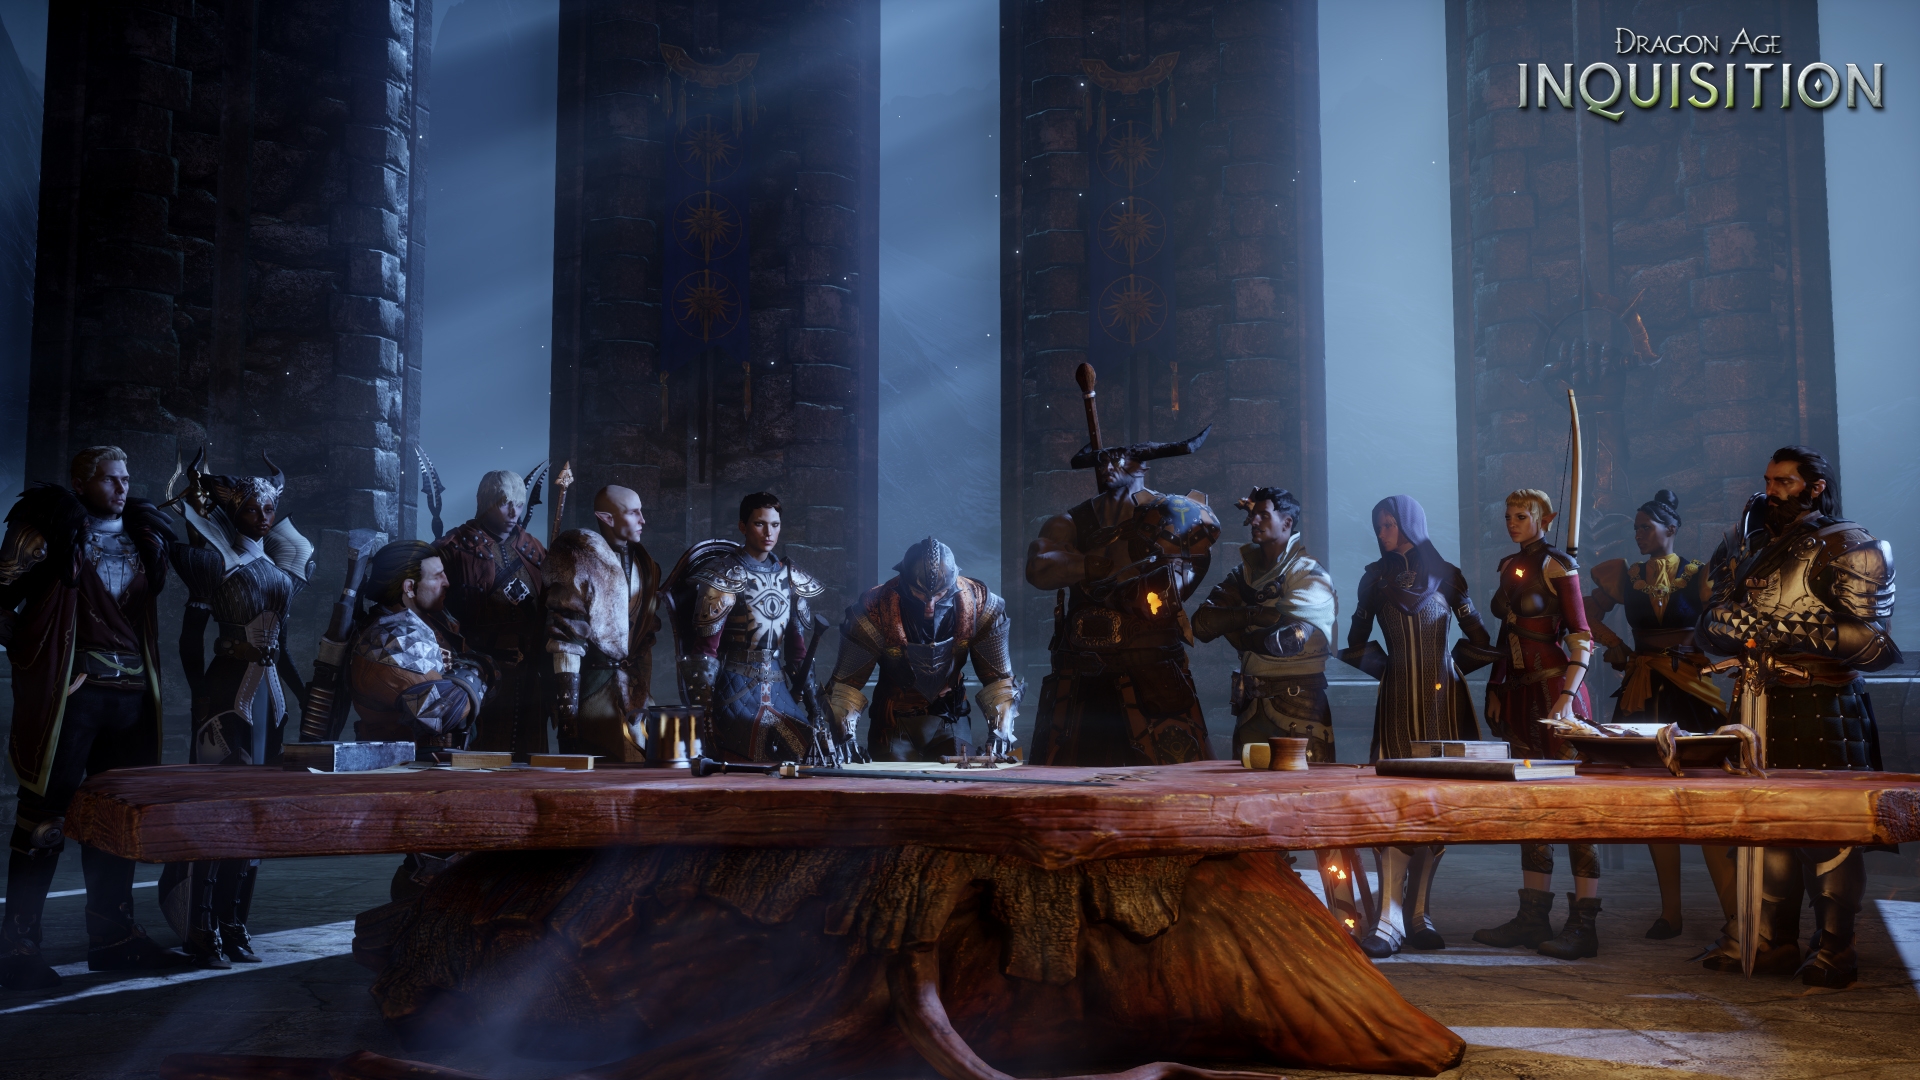 Dragon-Age-Inquisition-Review2.jpg